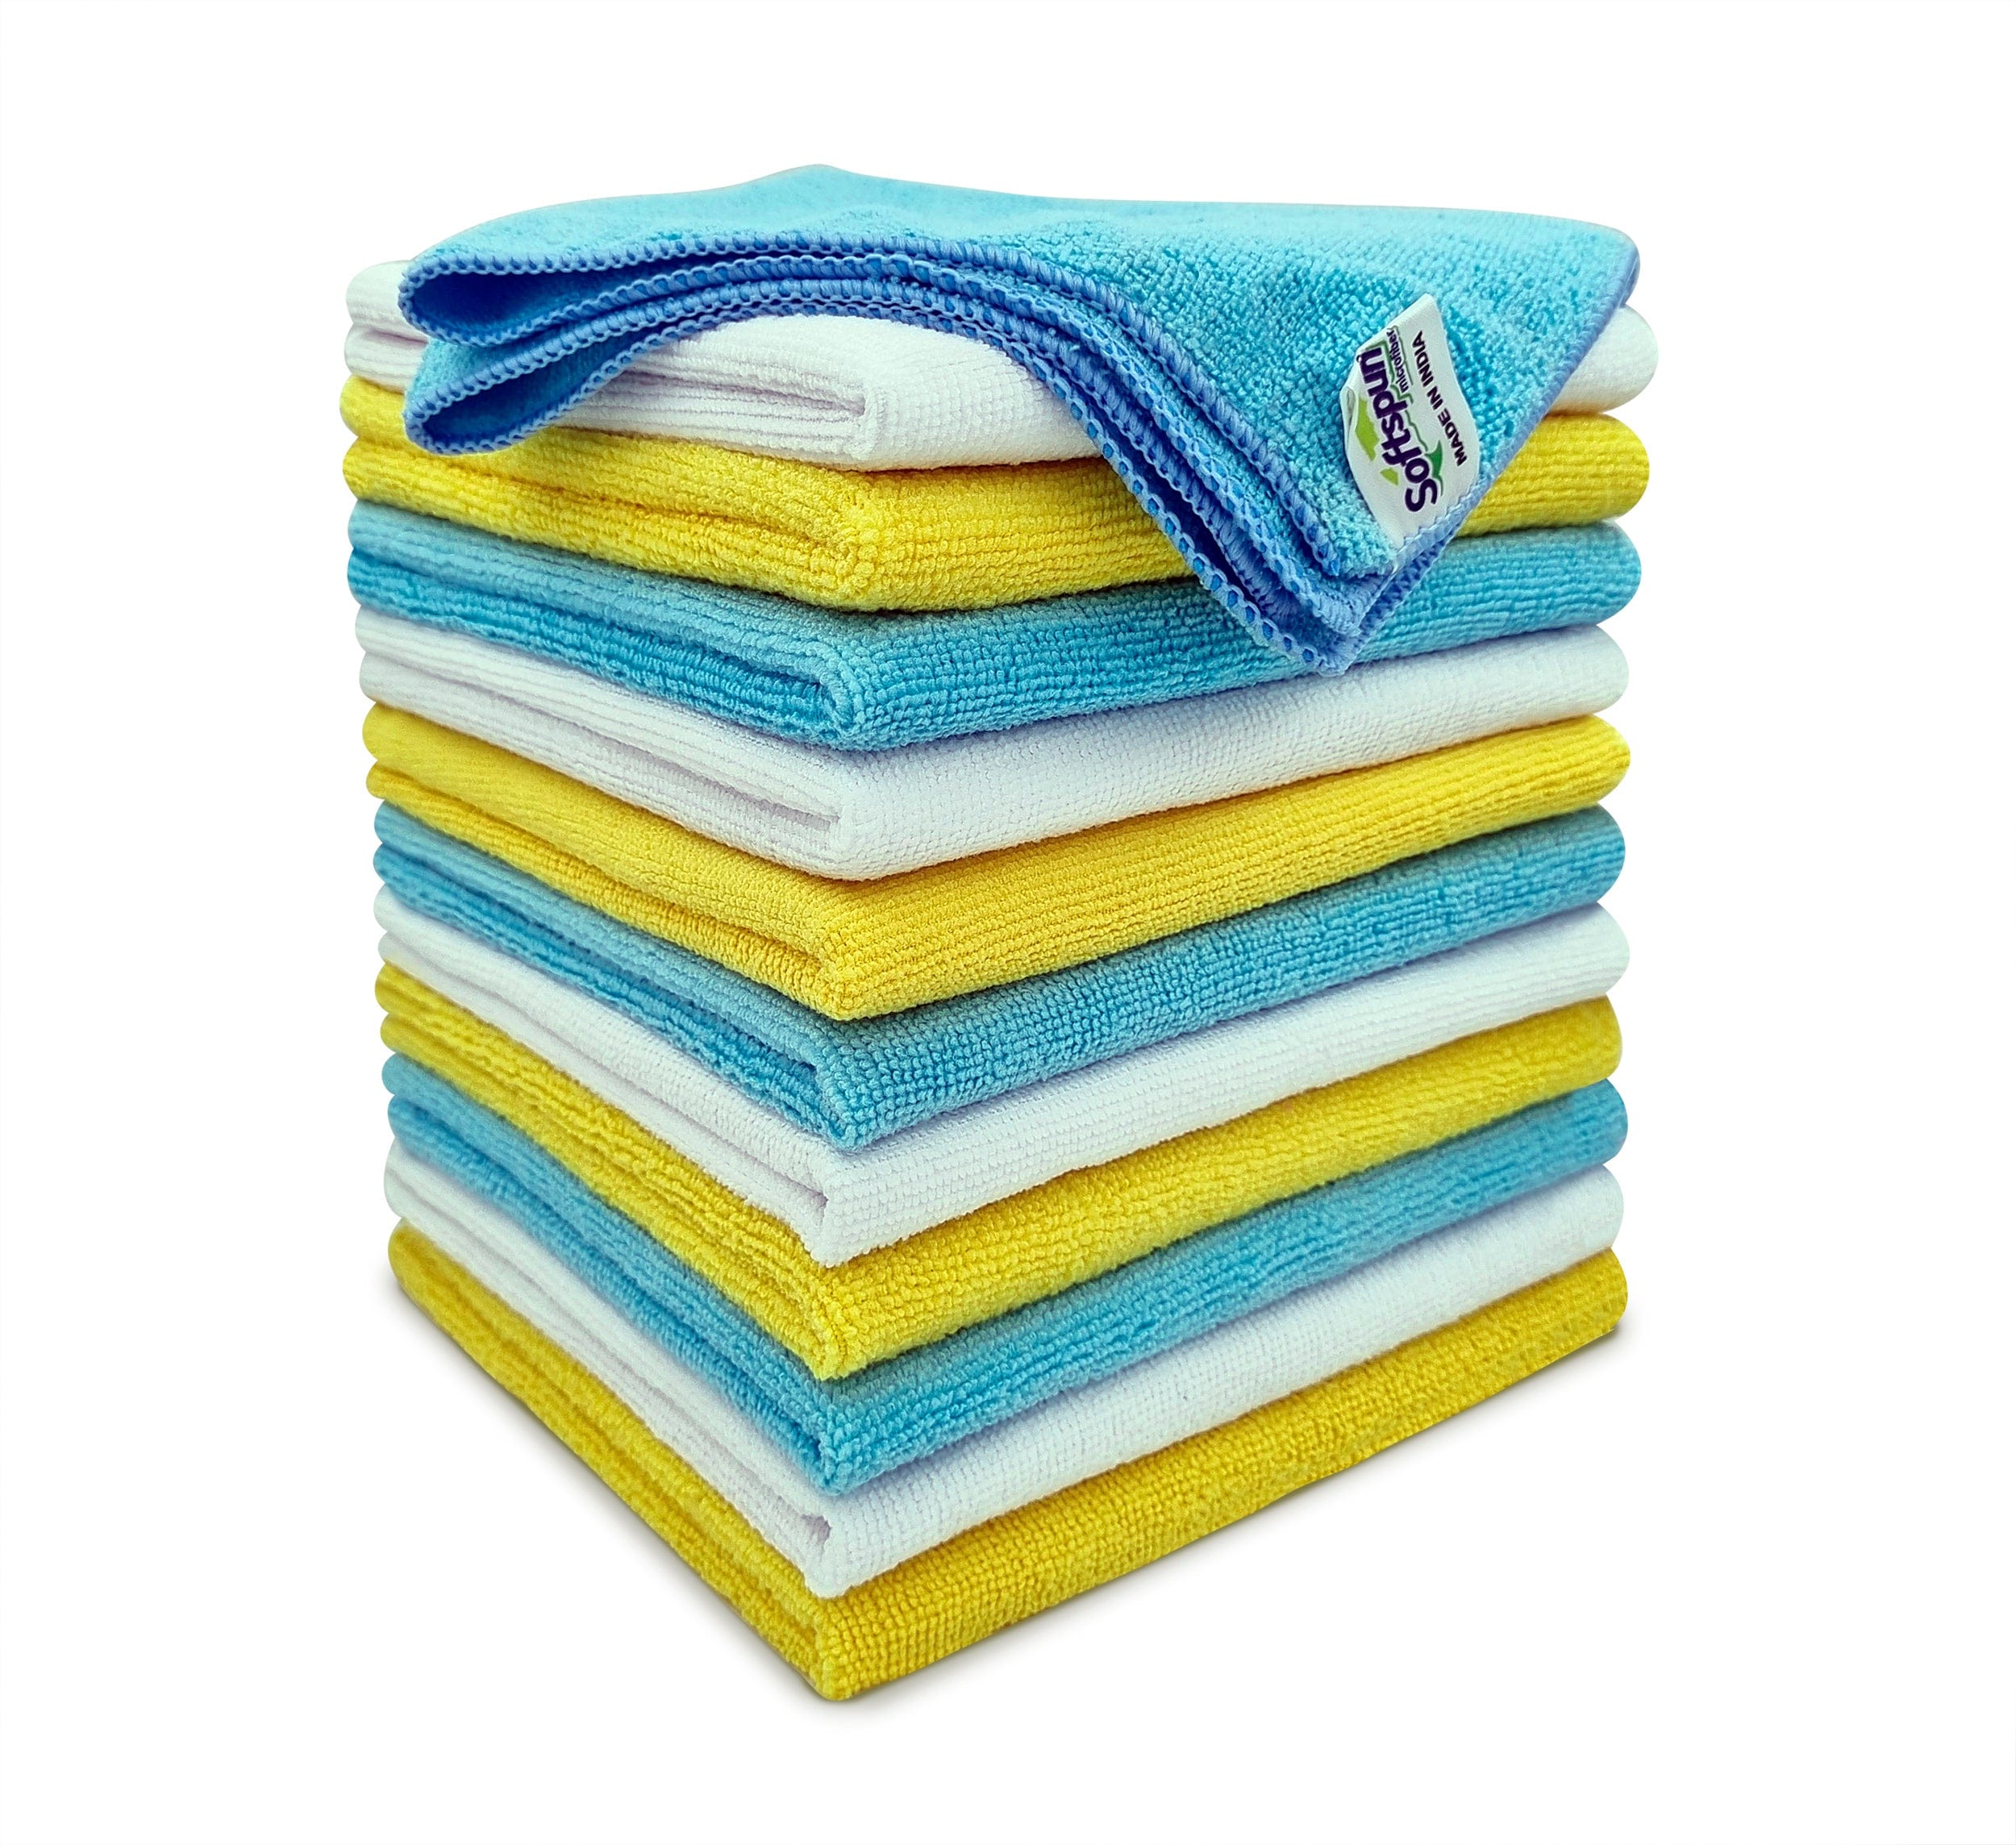 SOFTSPUN Microfiber Cleaning Cloths,220GSM Multi-Color. Highly Absorbent, Lint and Streak Free, Multi - Purpose Wash Cloth for Kitchen, Car, Window, Stainless Steel, Silverware.